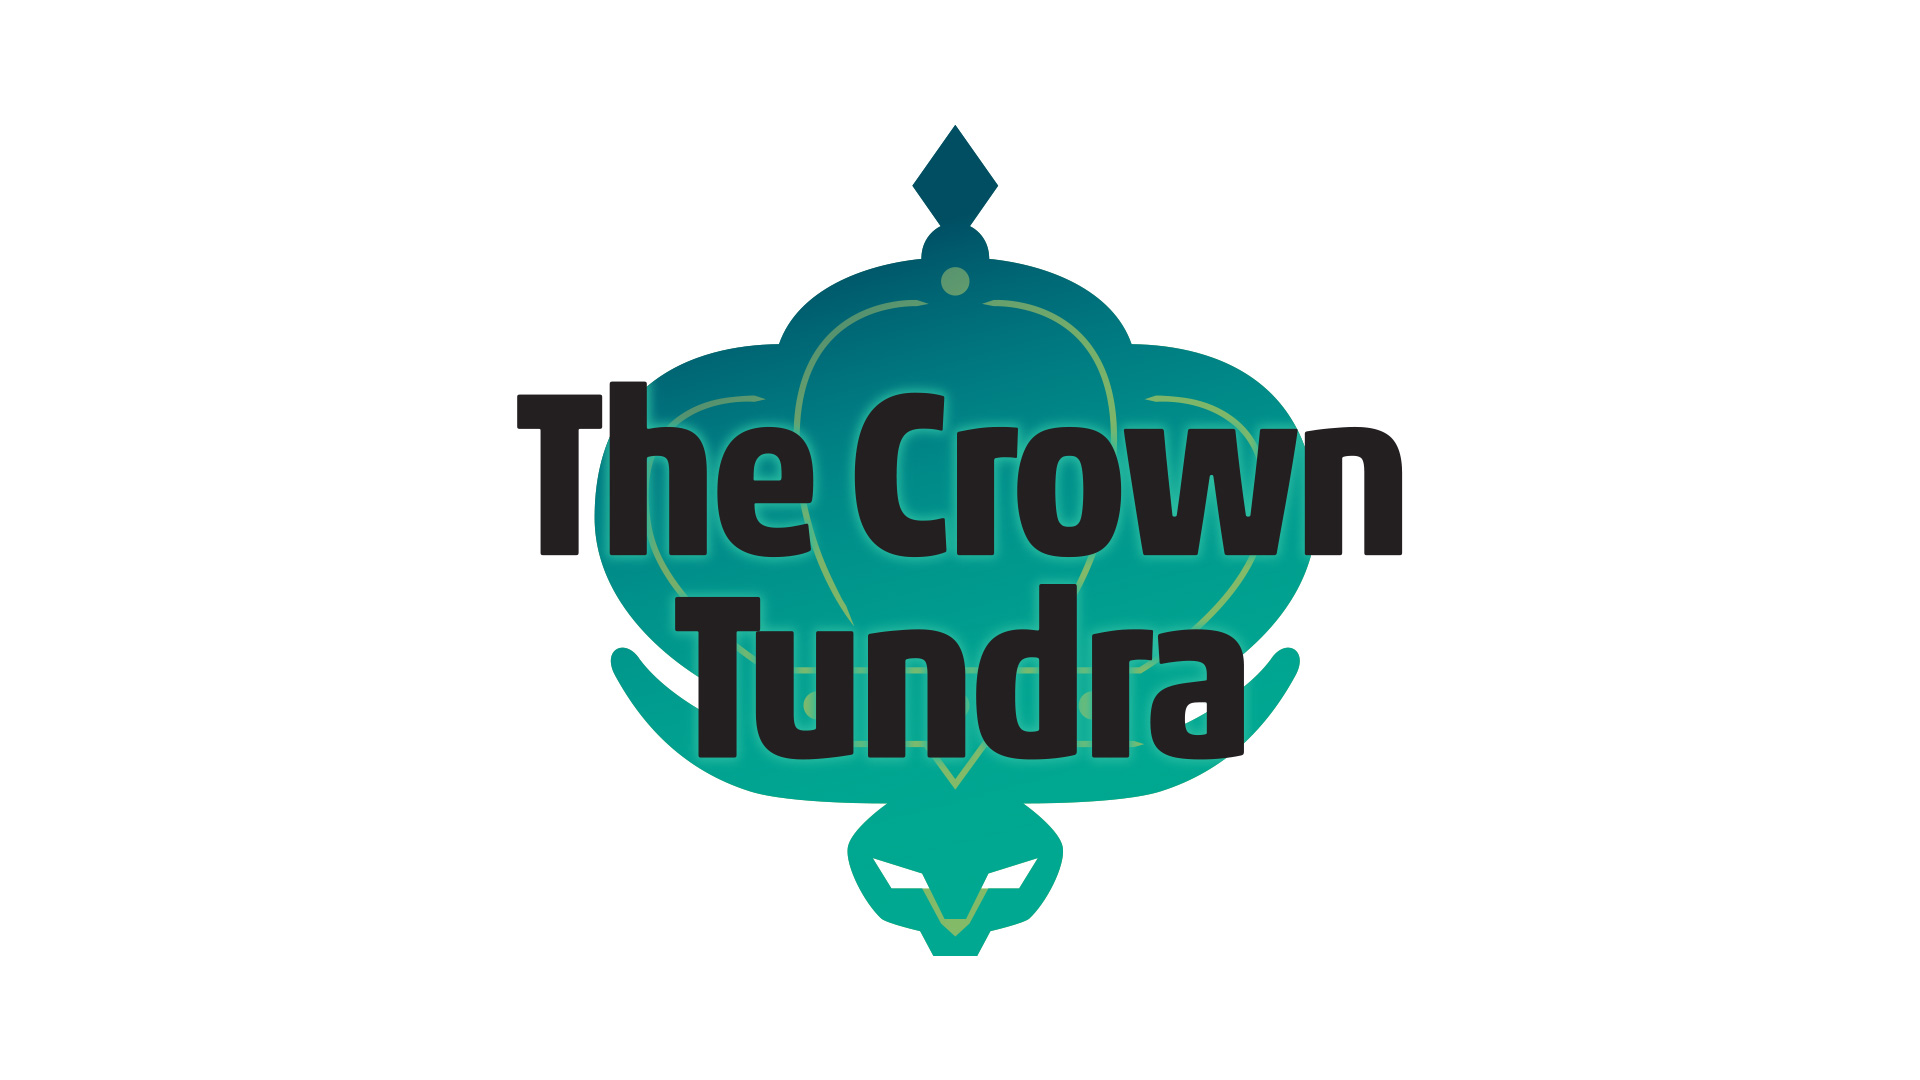 The Crown Tundra